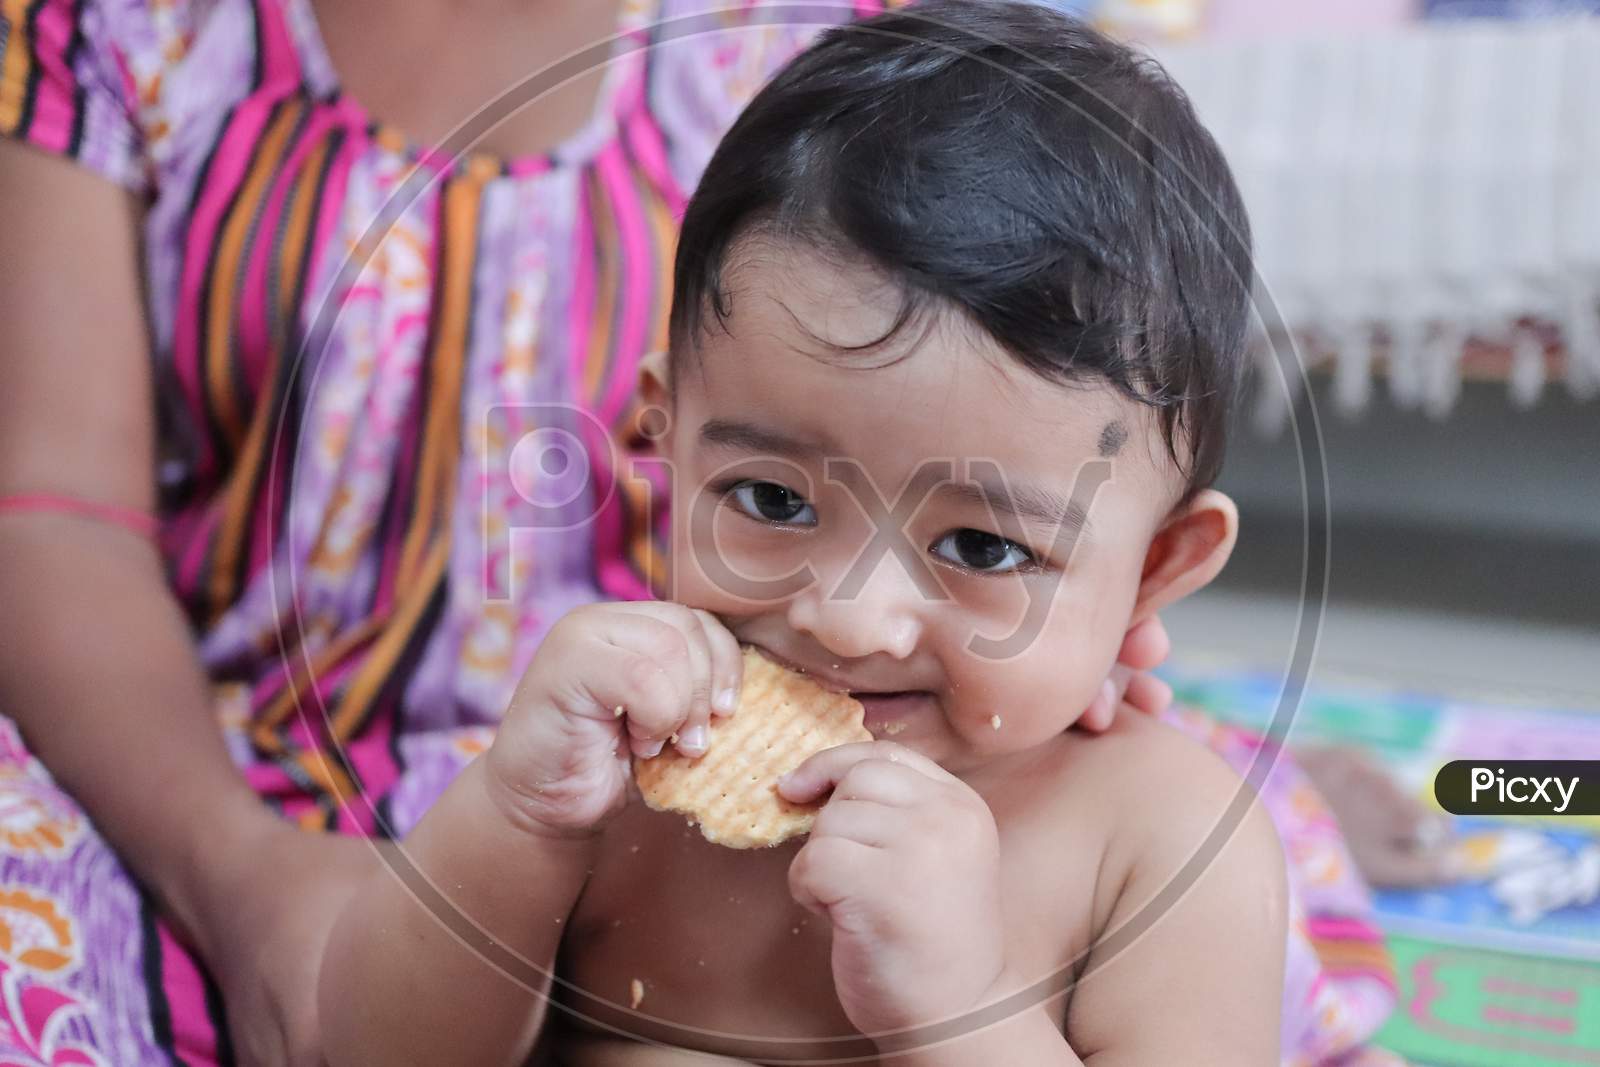 A Newborn Male Toddler Trying To Bite A Biscuit For The First Time With His Gums